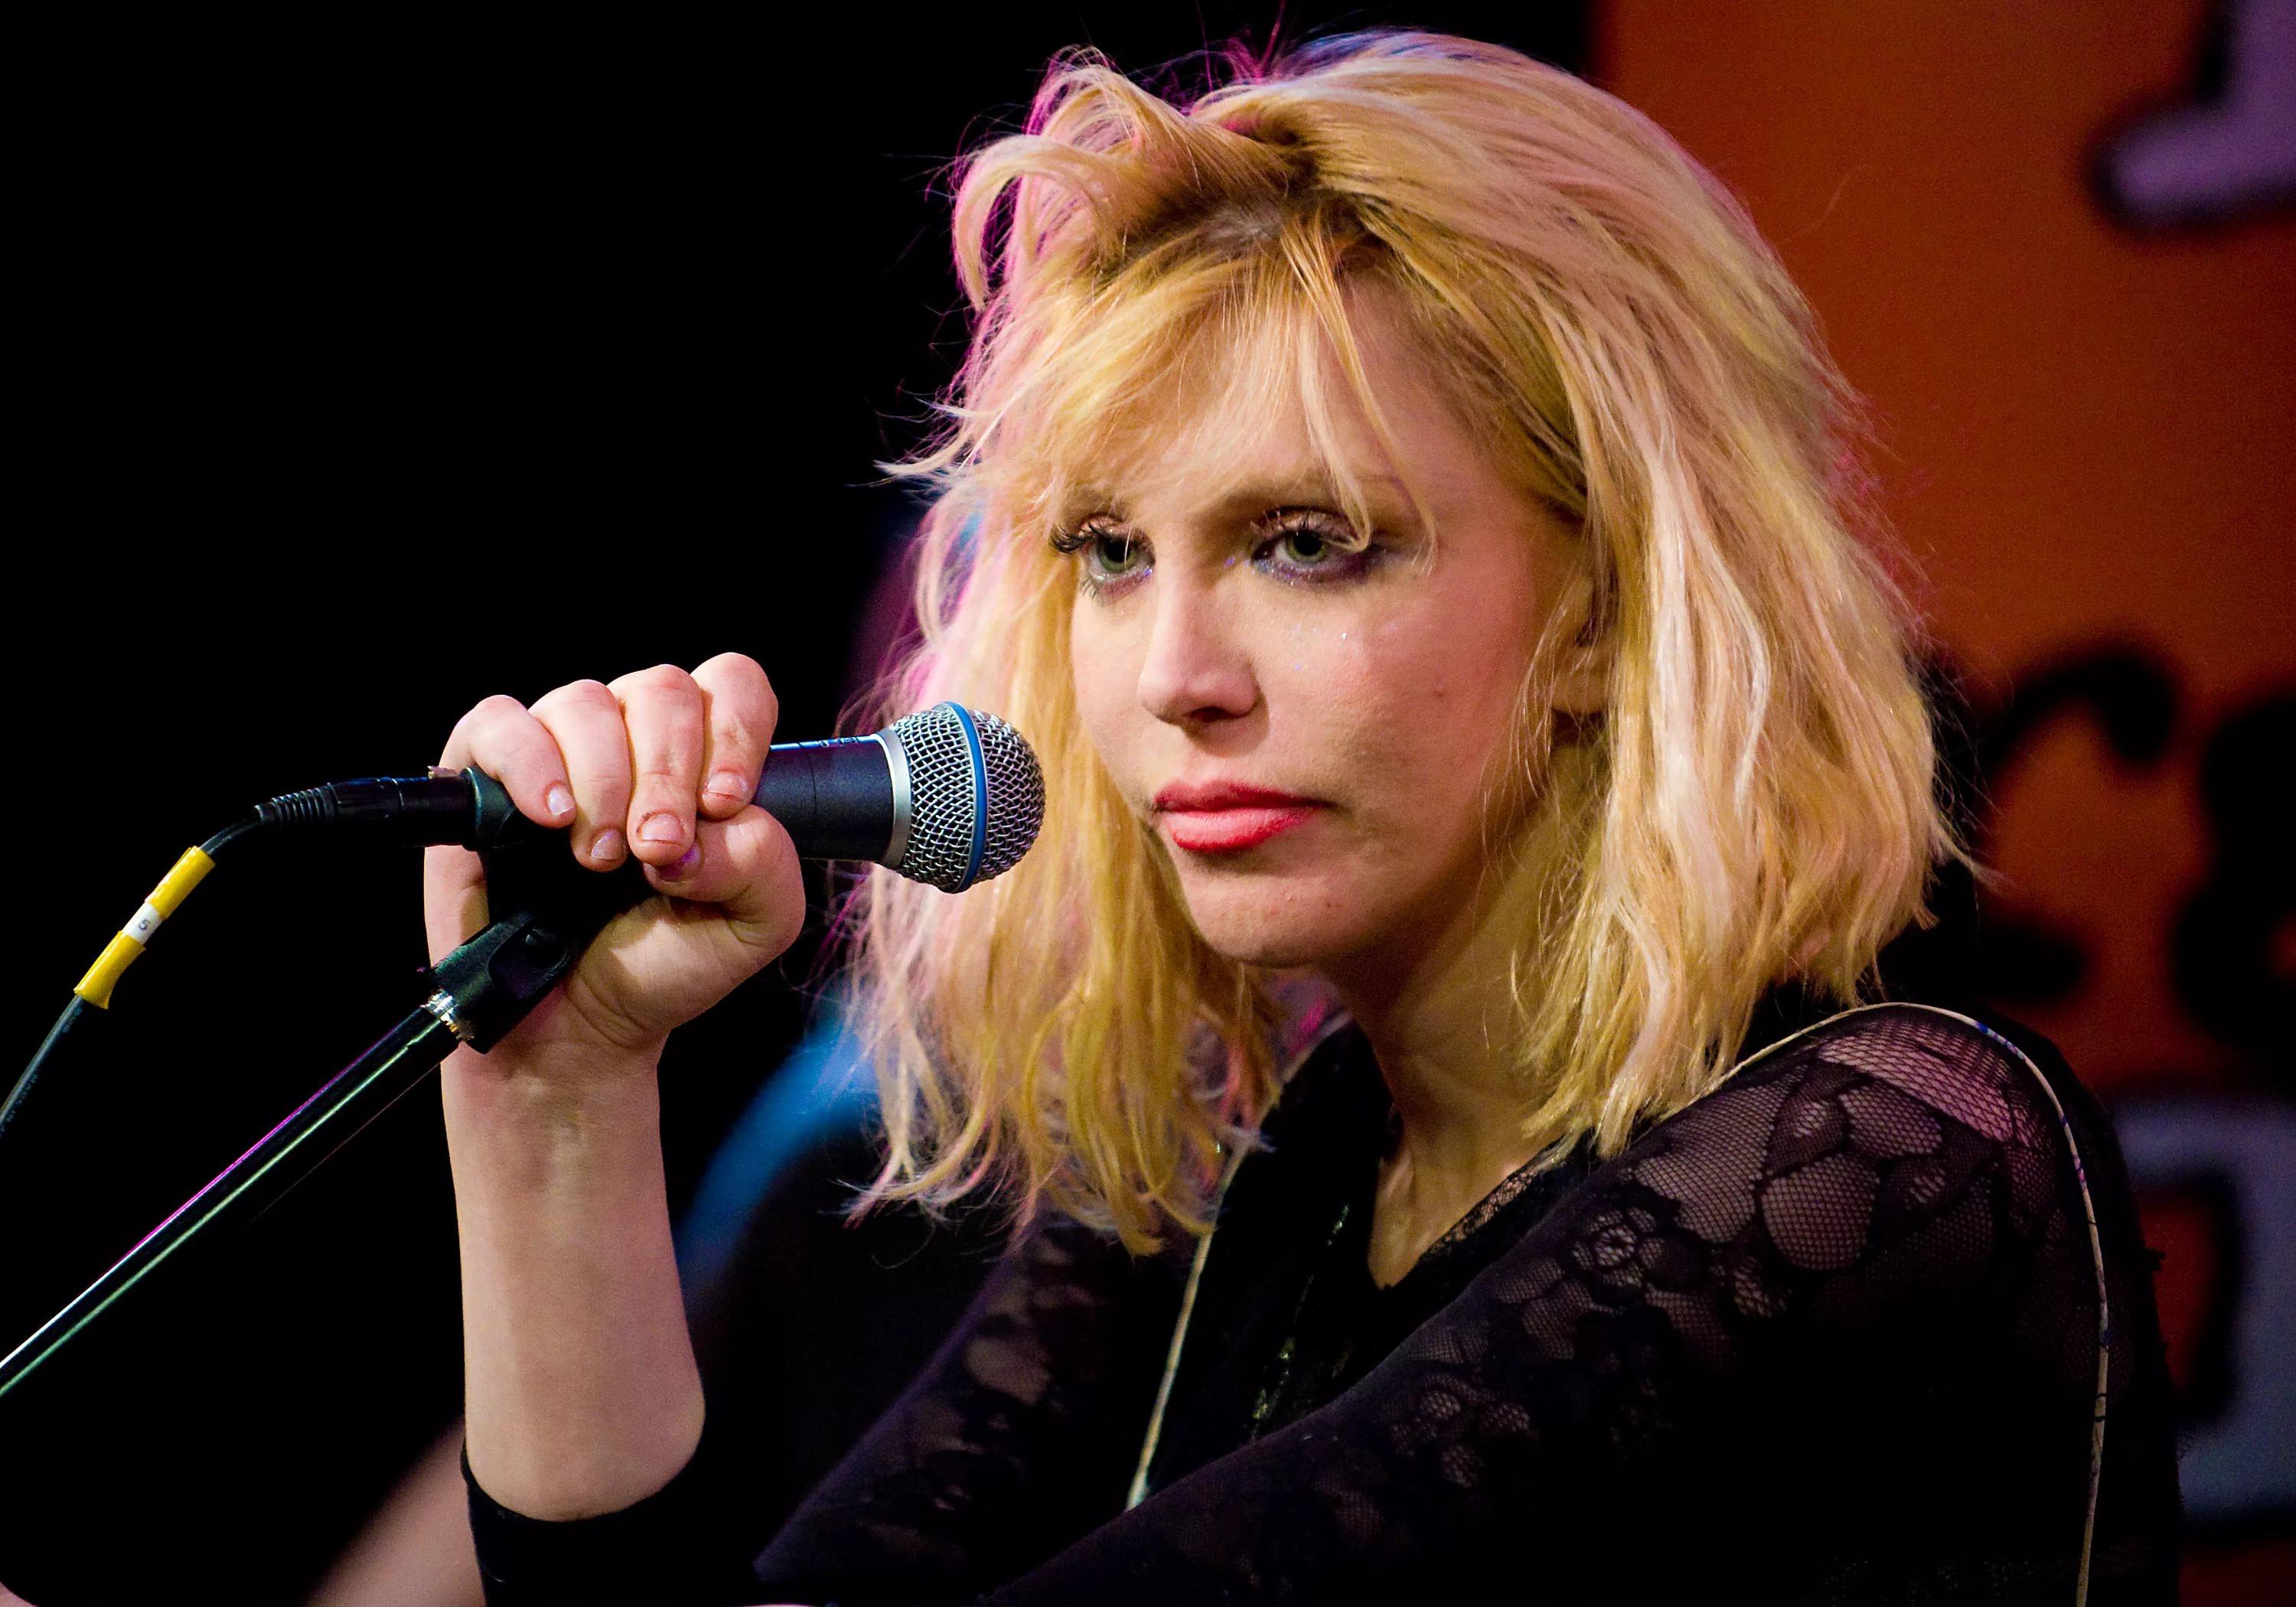 Courtney Love Wallpaper Widescreen Image Photo Picture